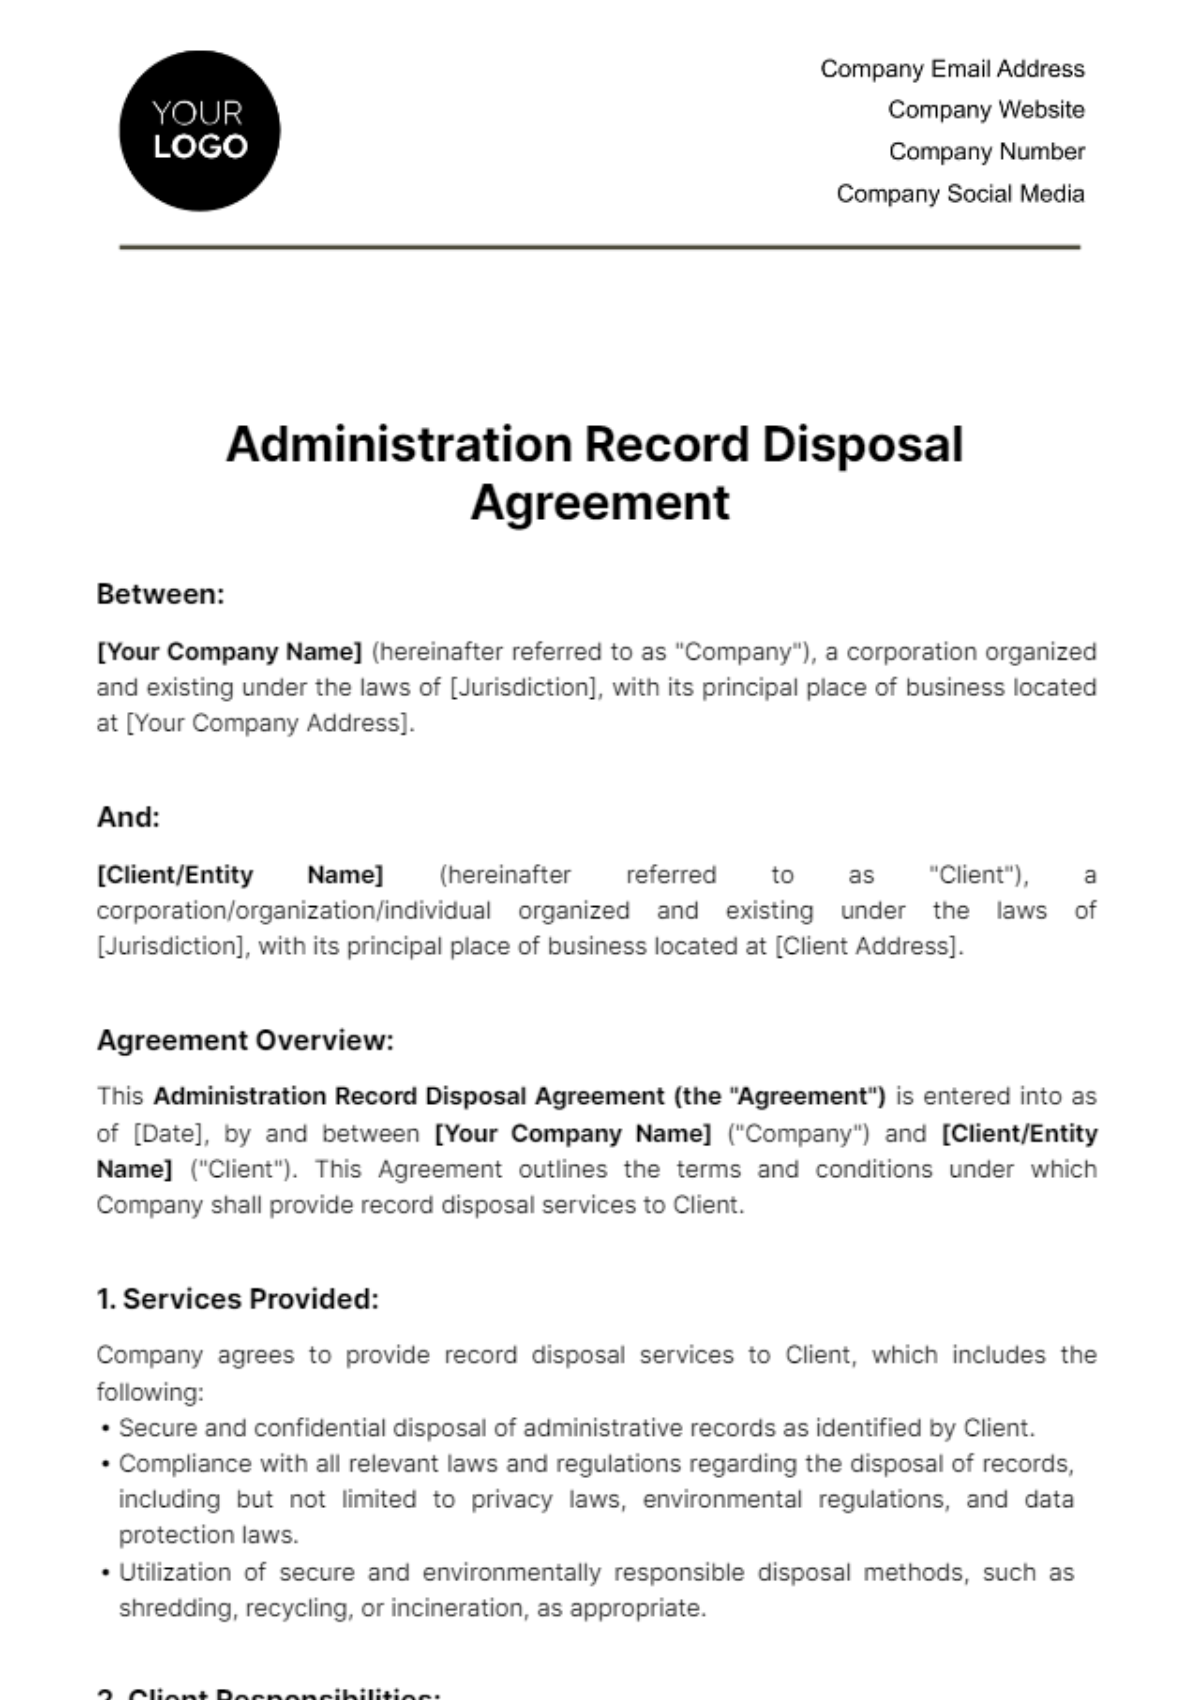 Free Administration Record Disposal Agreement Template